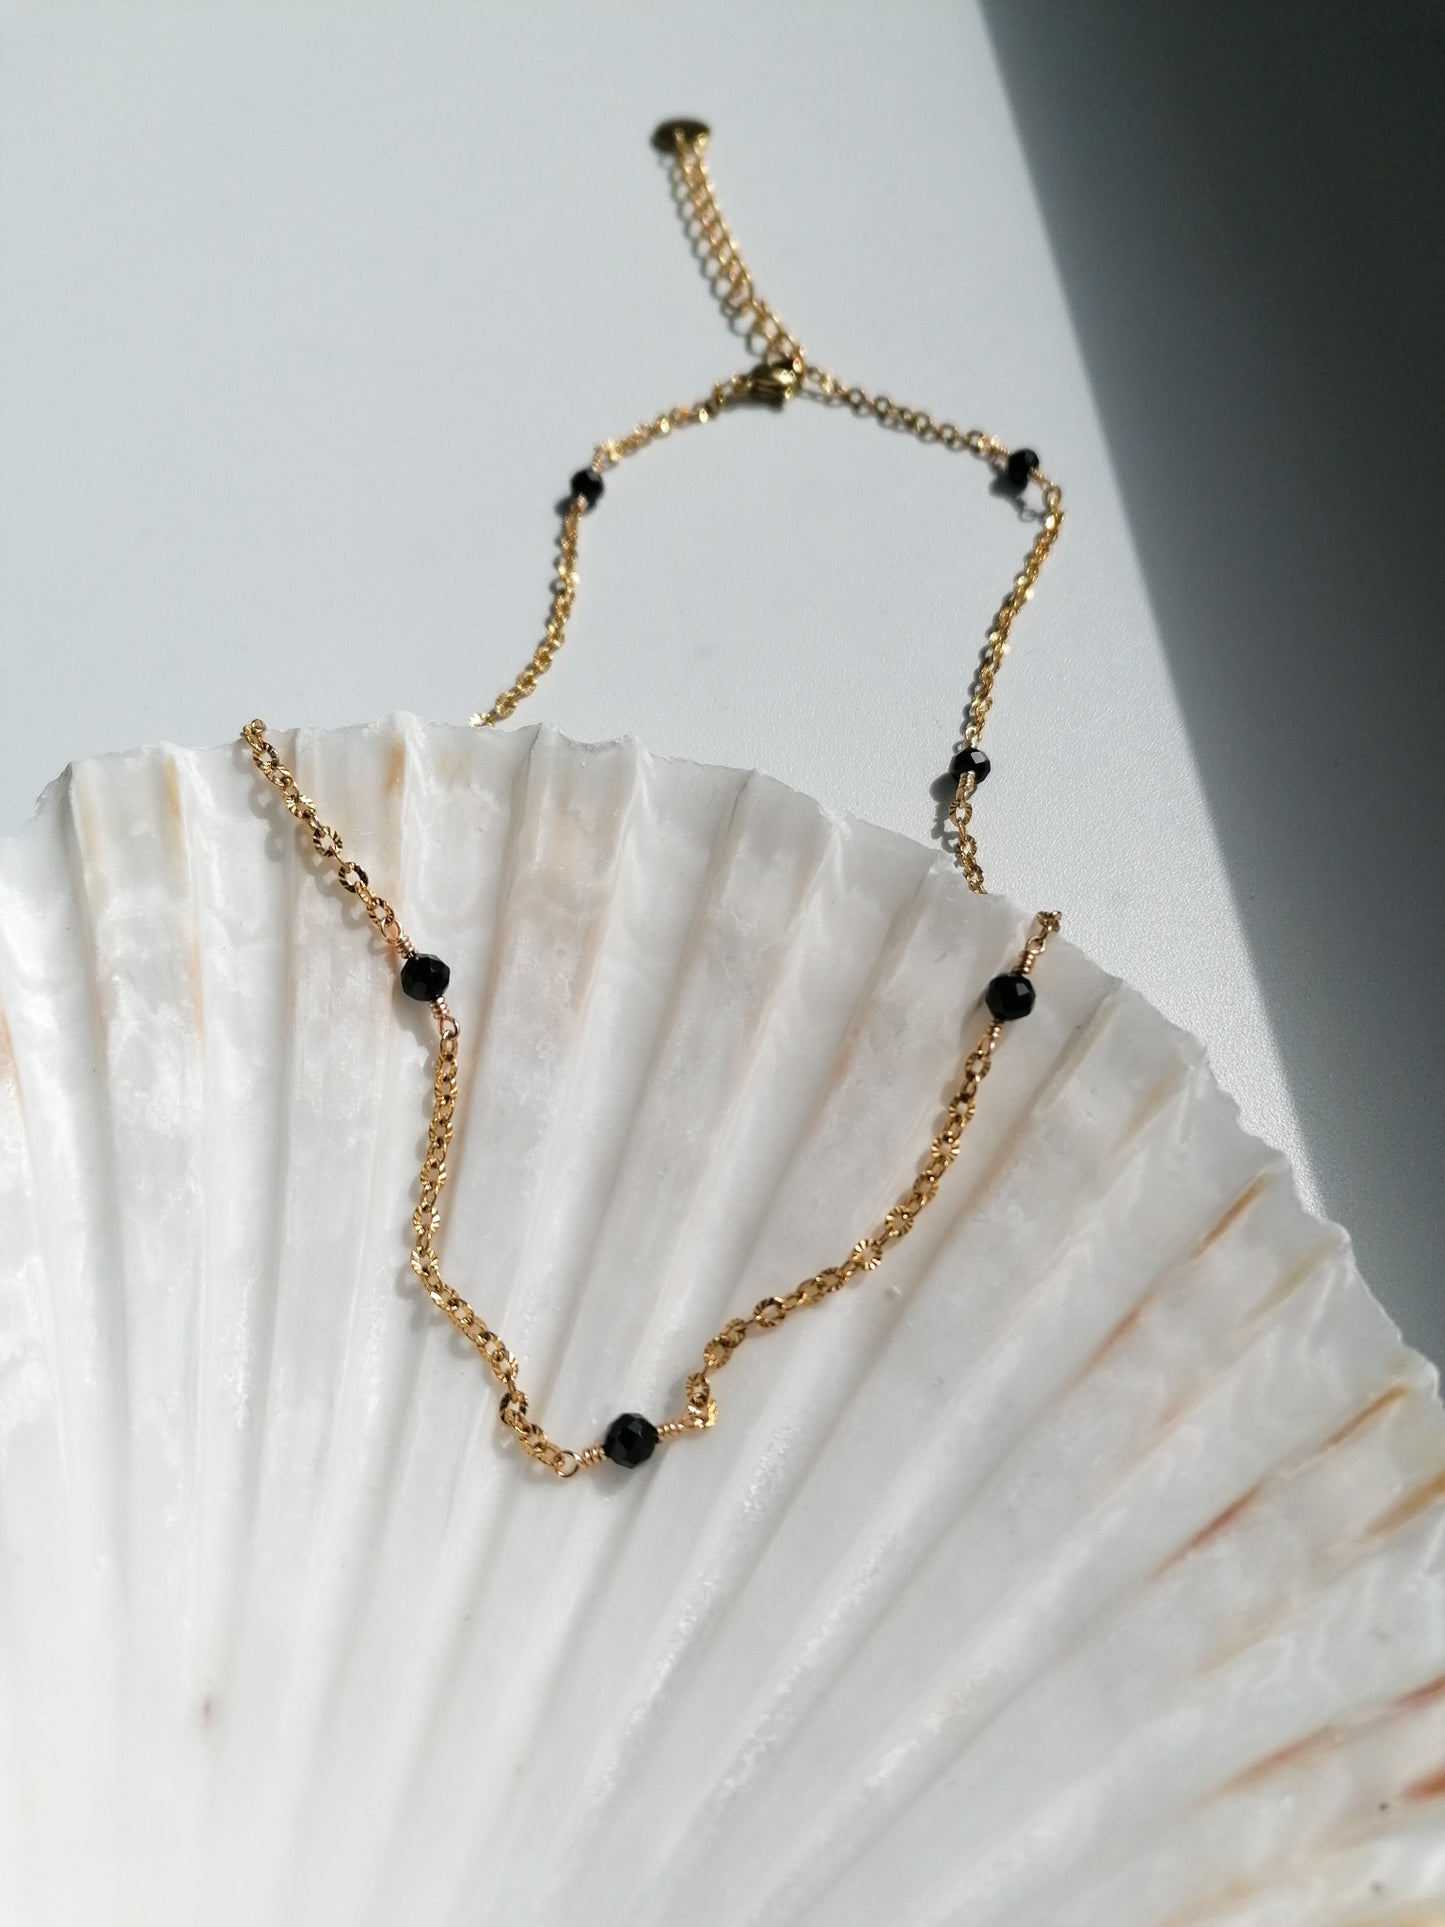 Aria necklace - black spinel